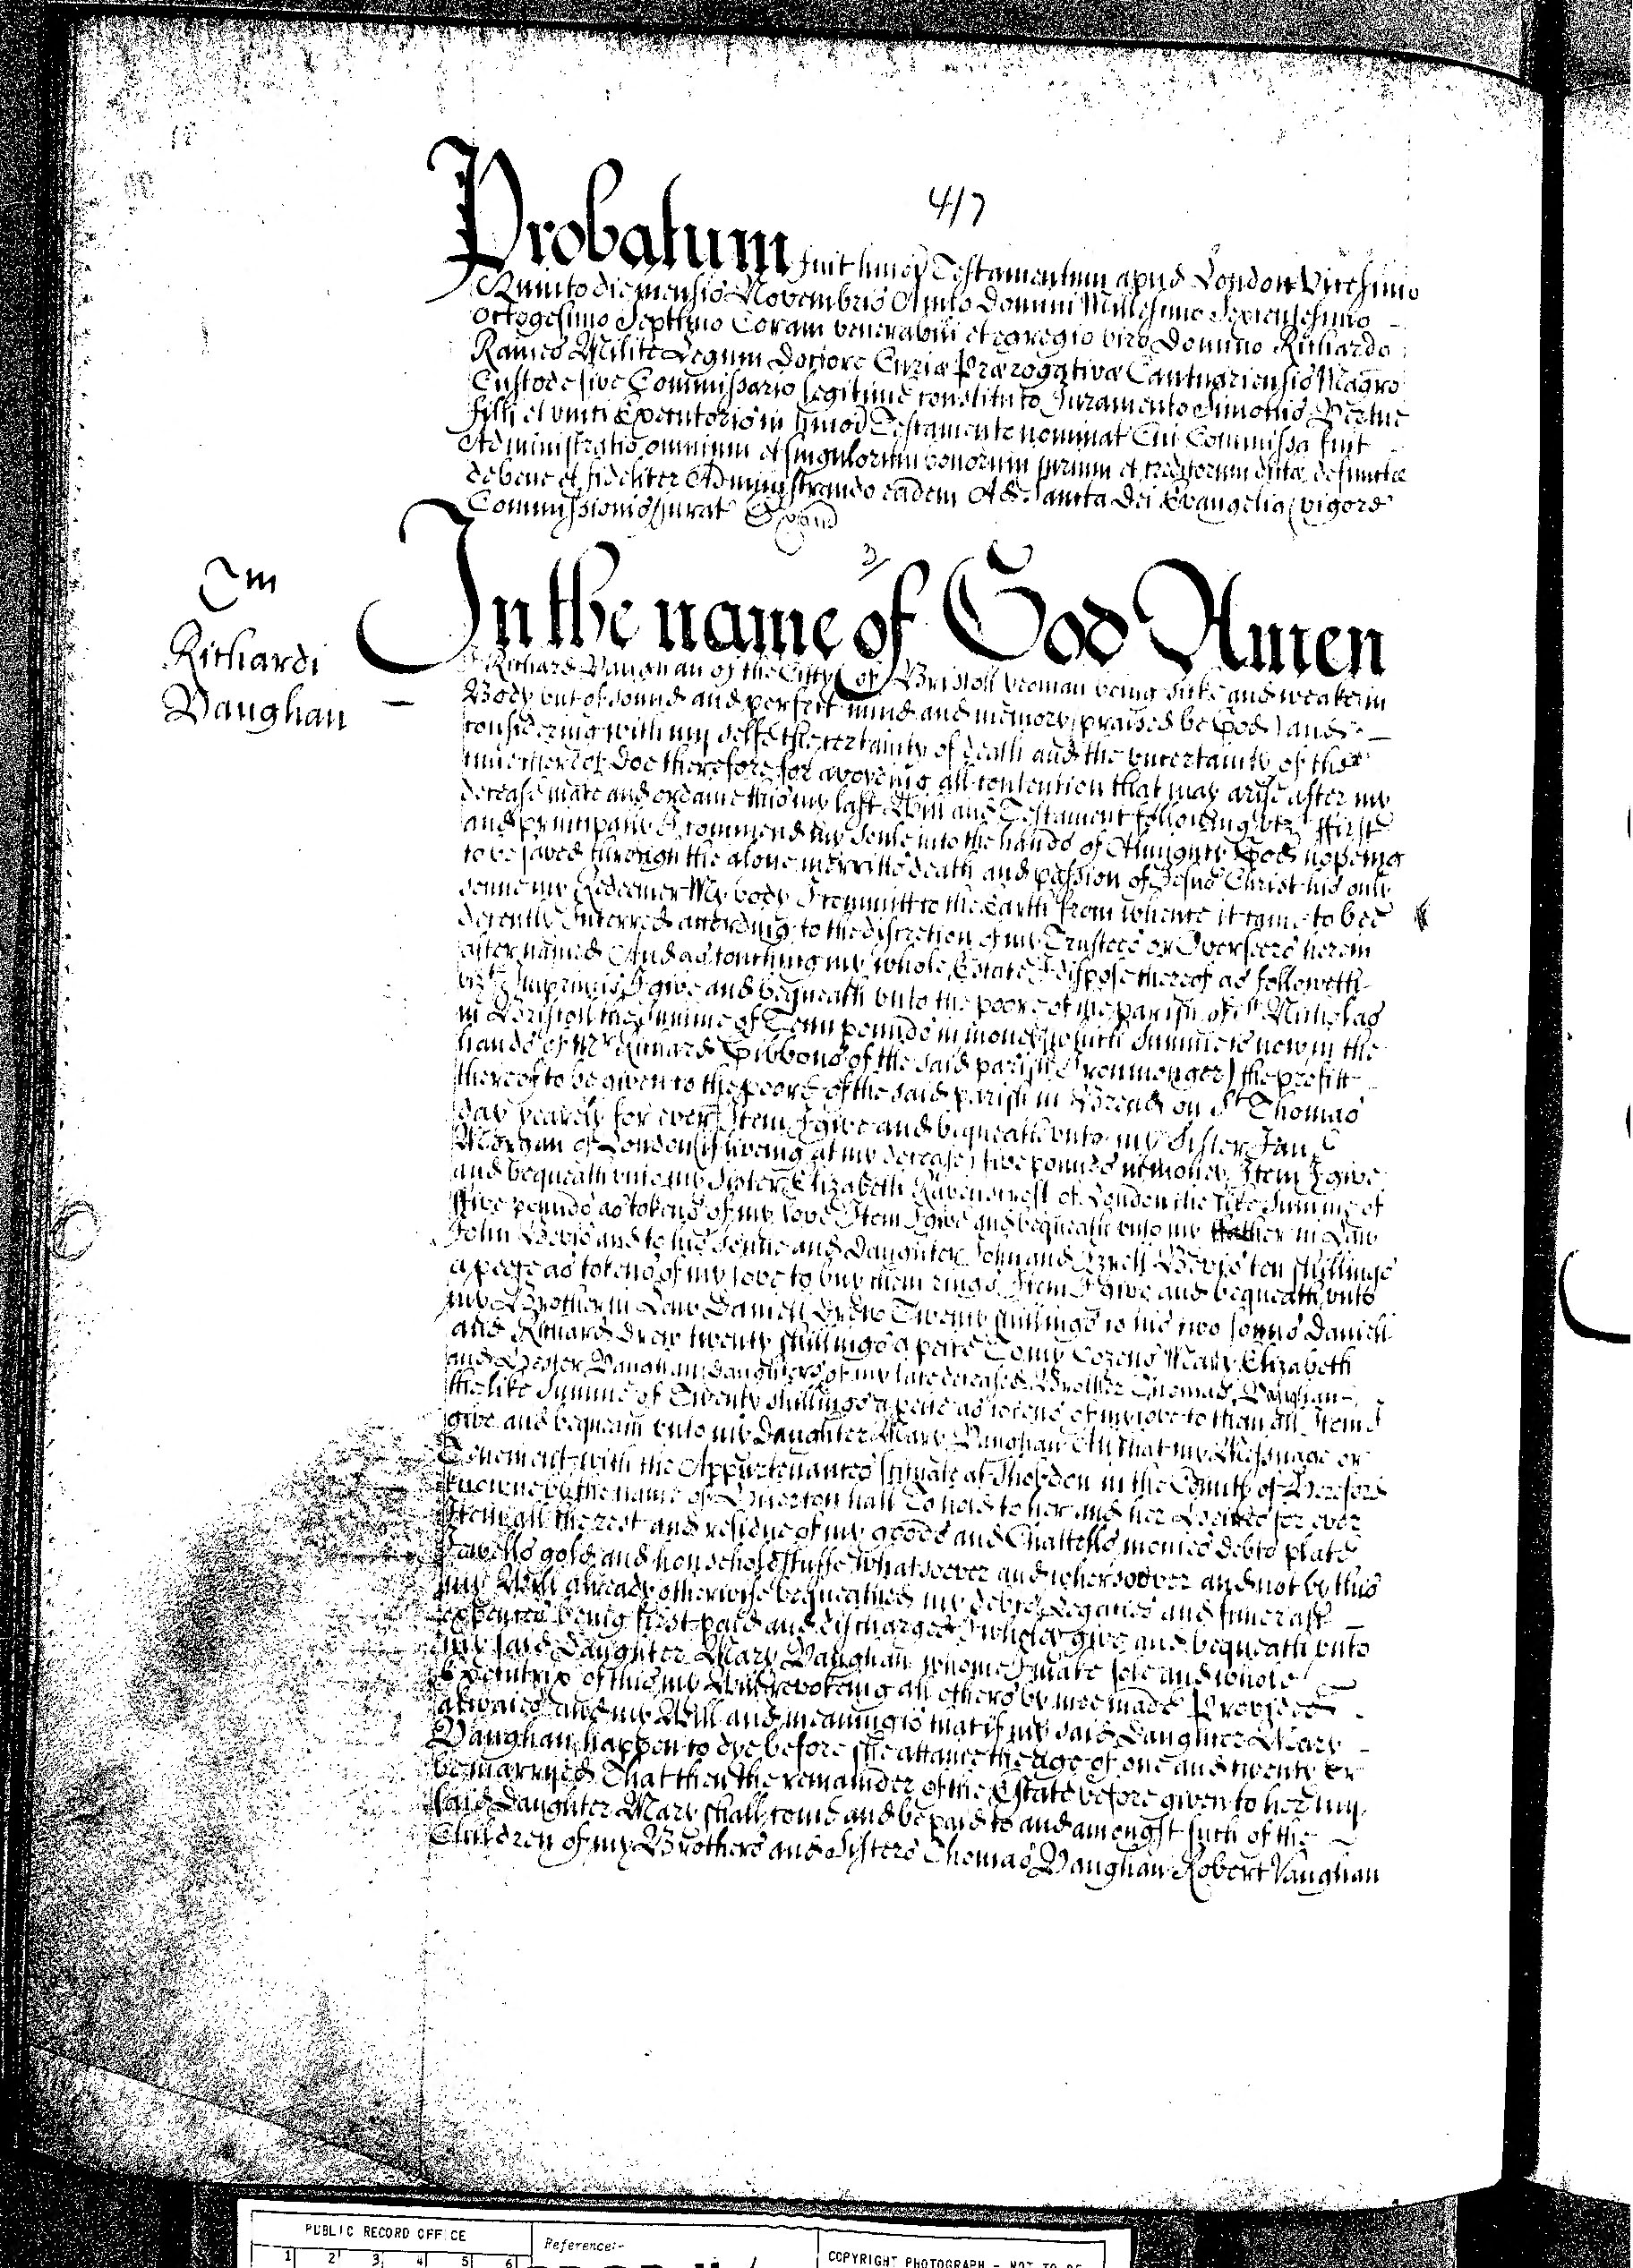 The will of Mary Vertue, 1686, page 3 - latin proving